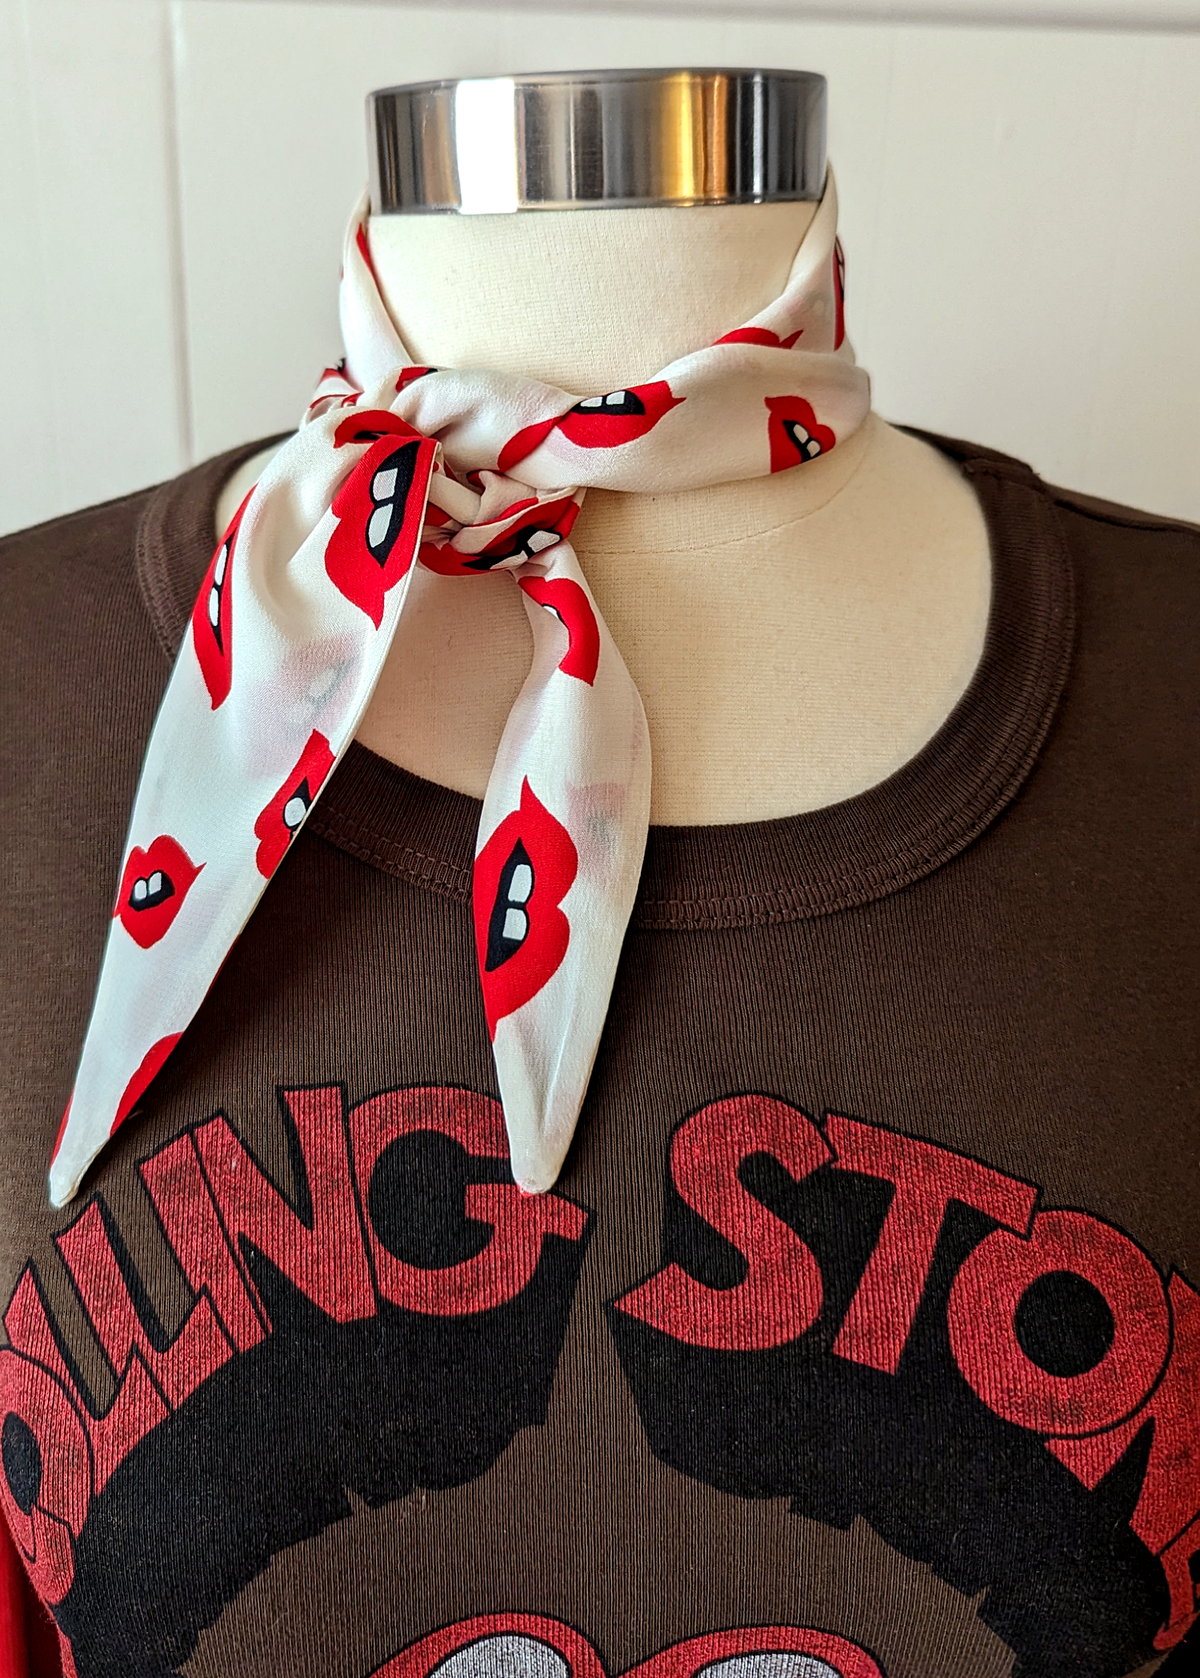 70s inspired white and red lips silk scarf tie by I'm With the Band, handmade in california